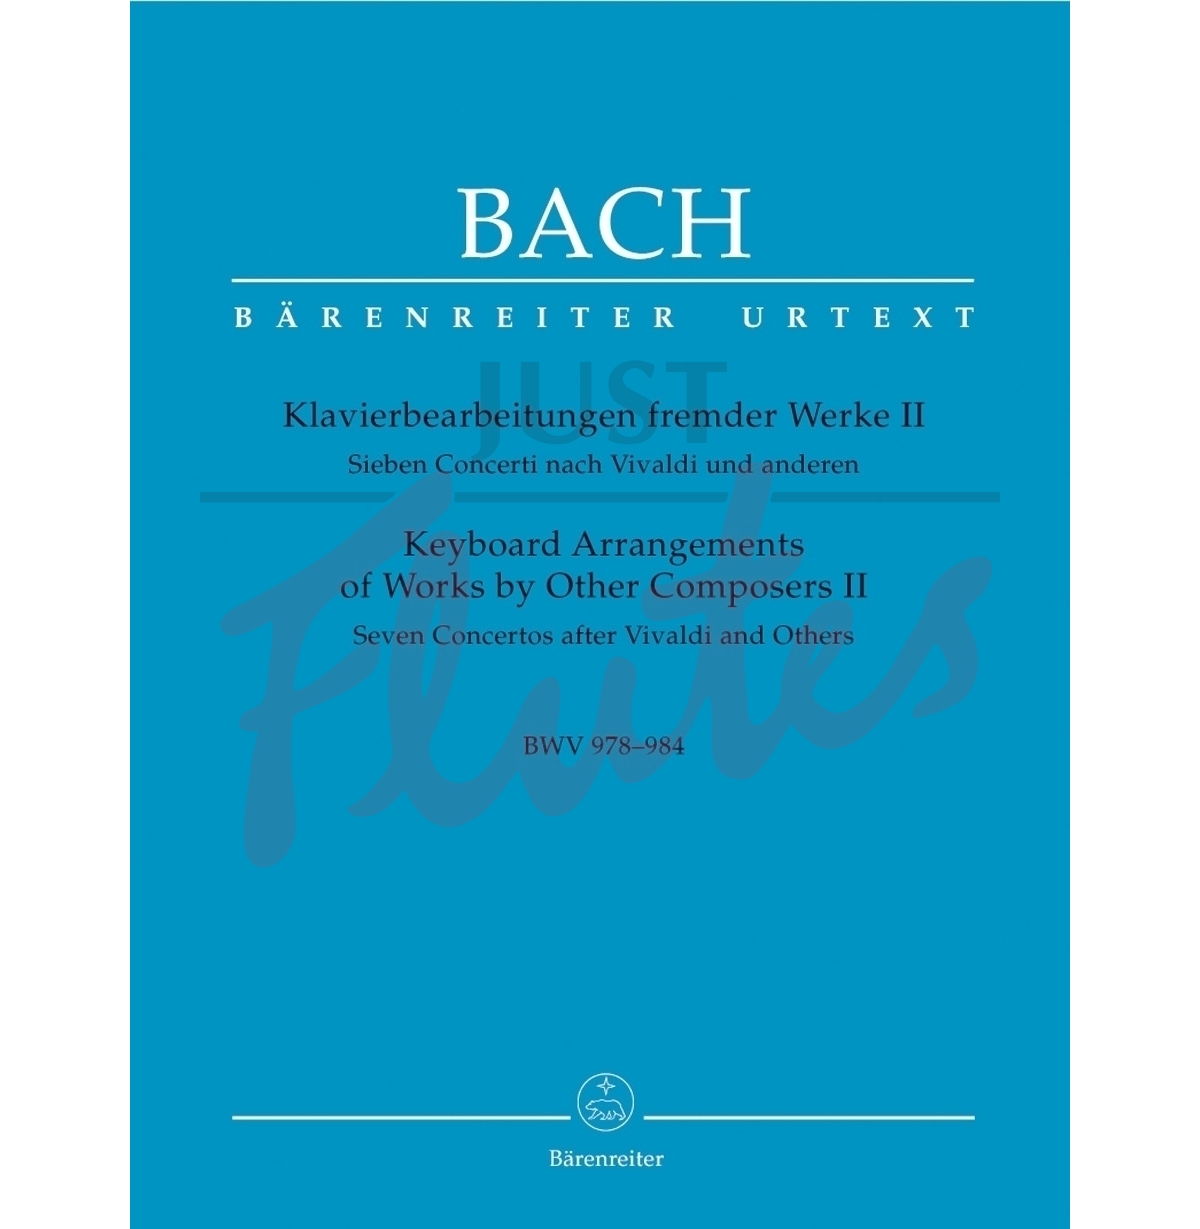 Keyboard Arrangements of Works by Other Composers Vol 2